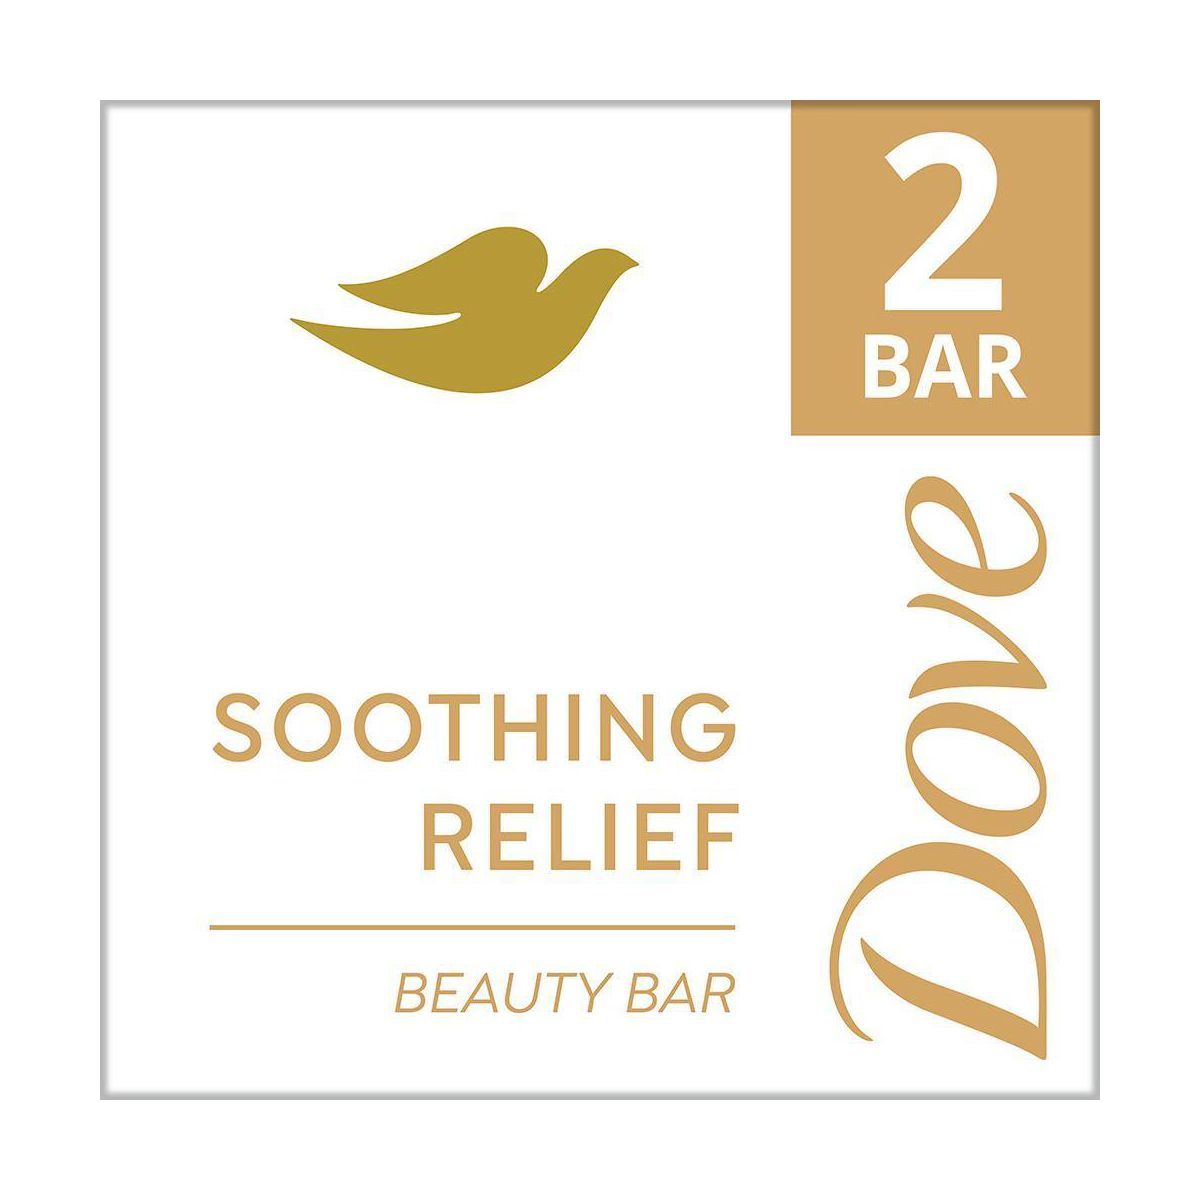 Dove Beauty Excema Bar Soap - 2ct | Target